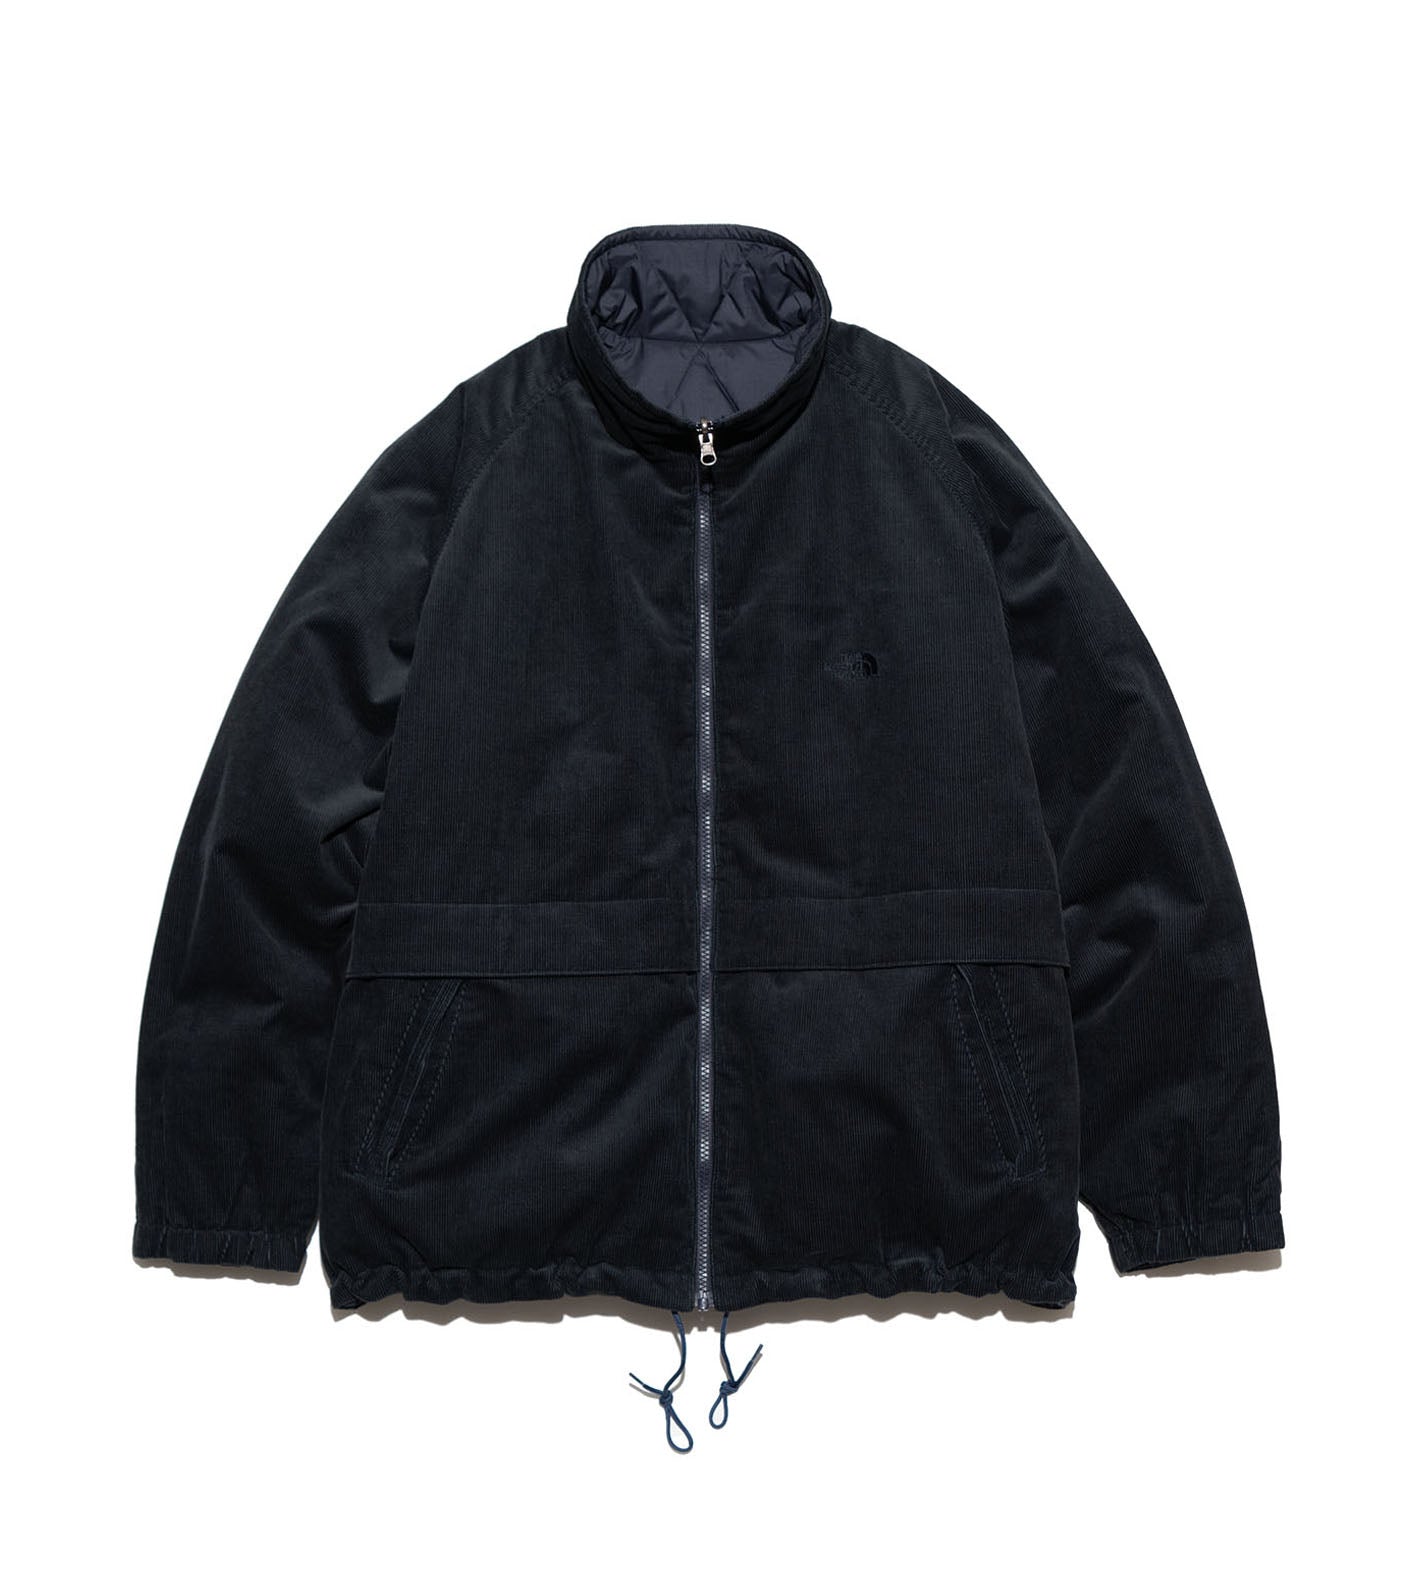 THE NORTH FACE PURPLE LABEL Corduroy Field Reversible Jacket